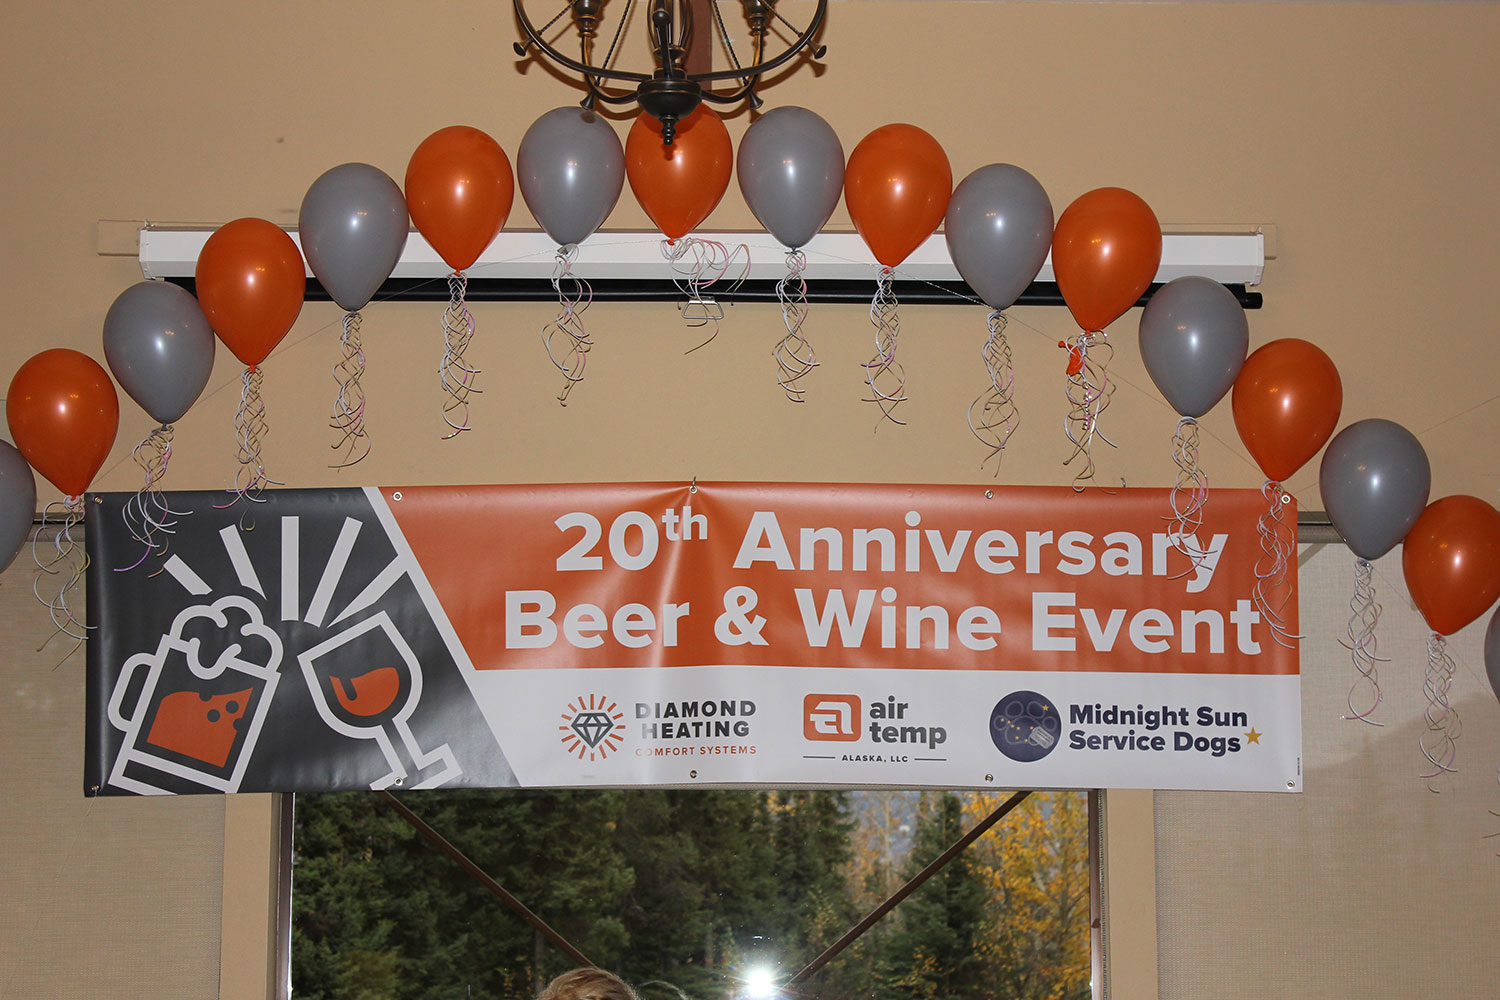 20TH Anniversary Beer & Wine Event